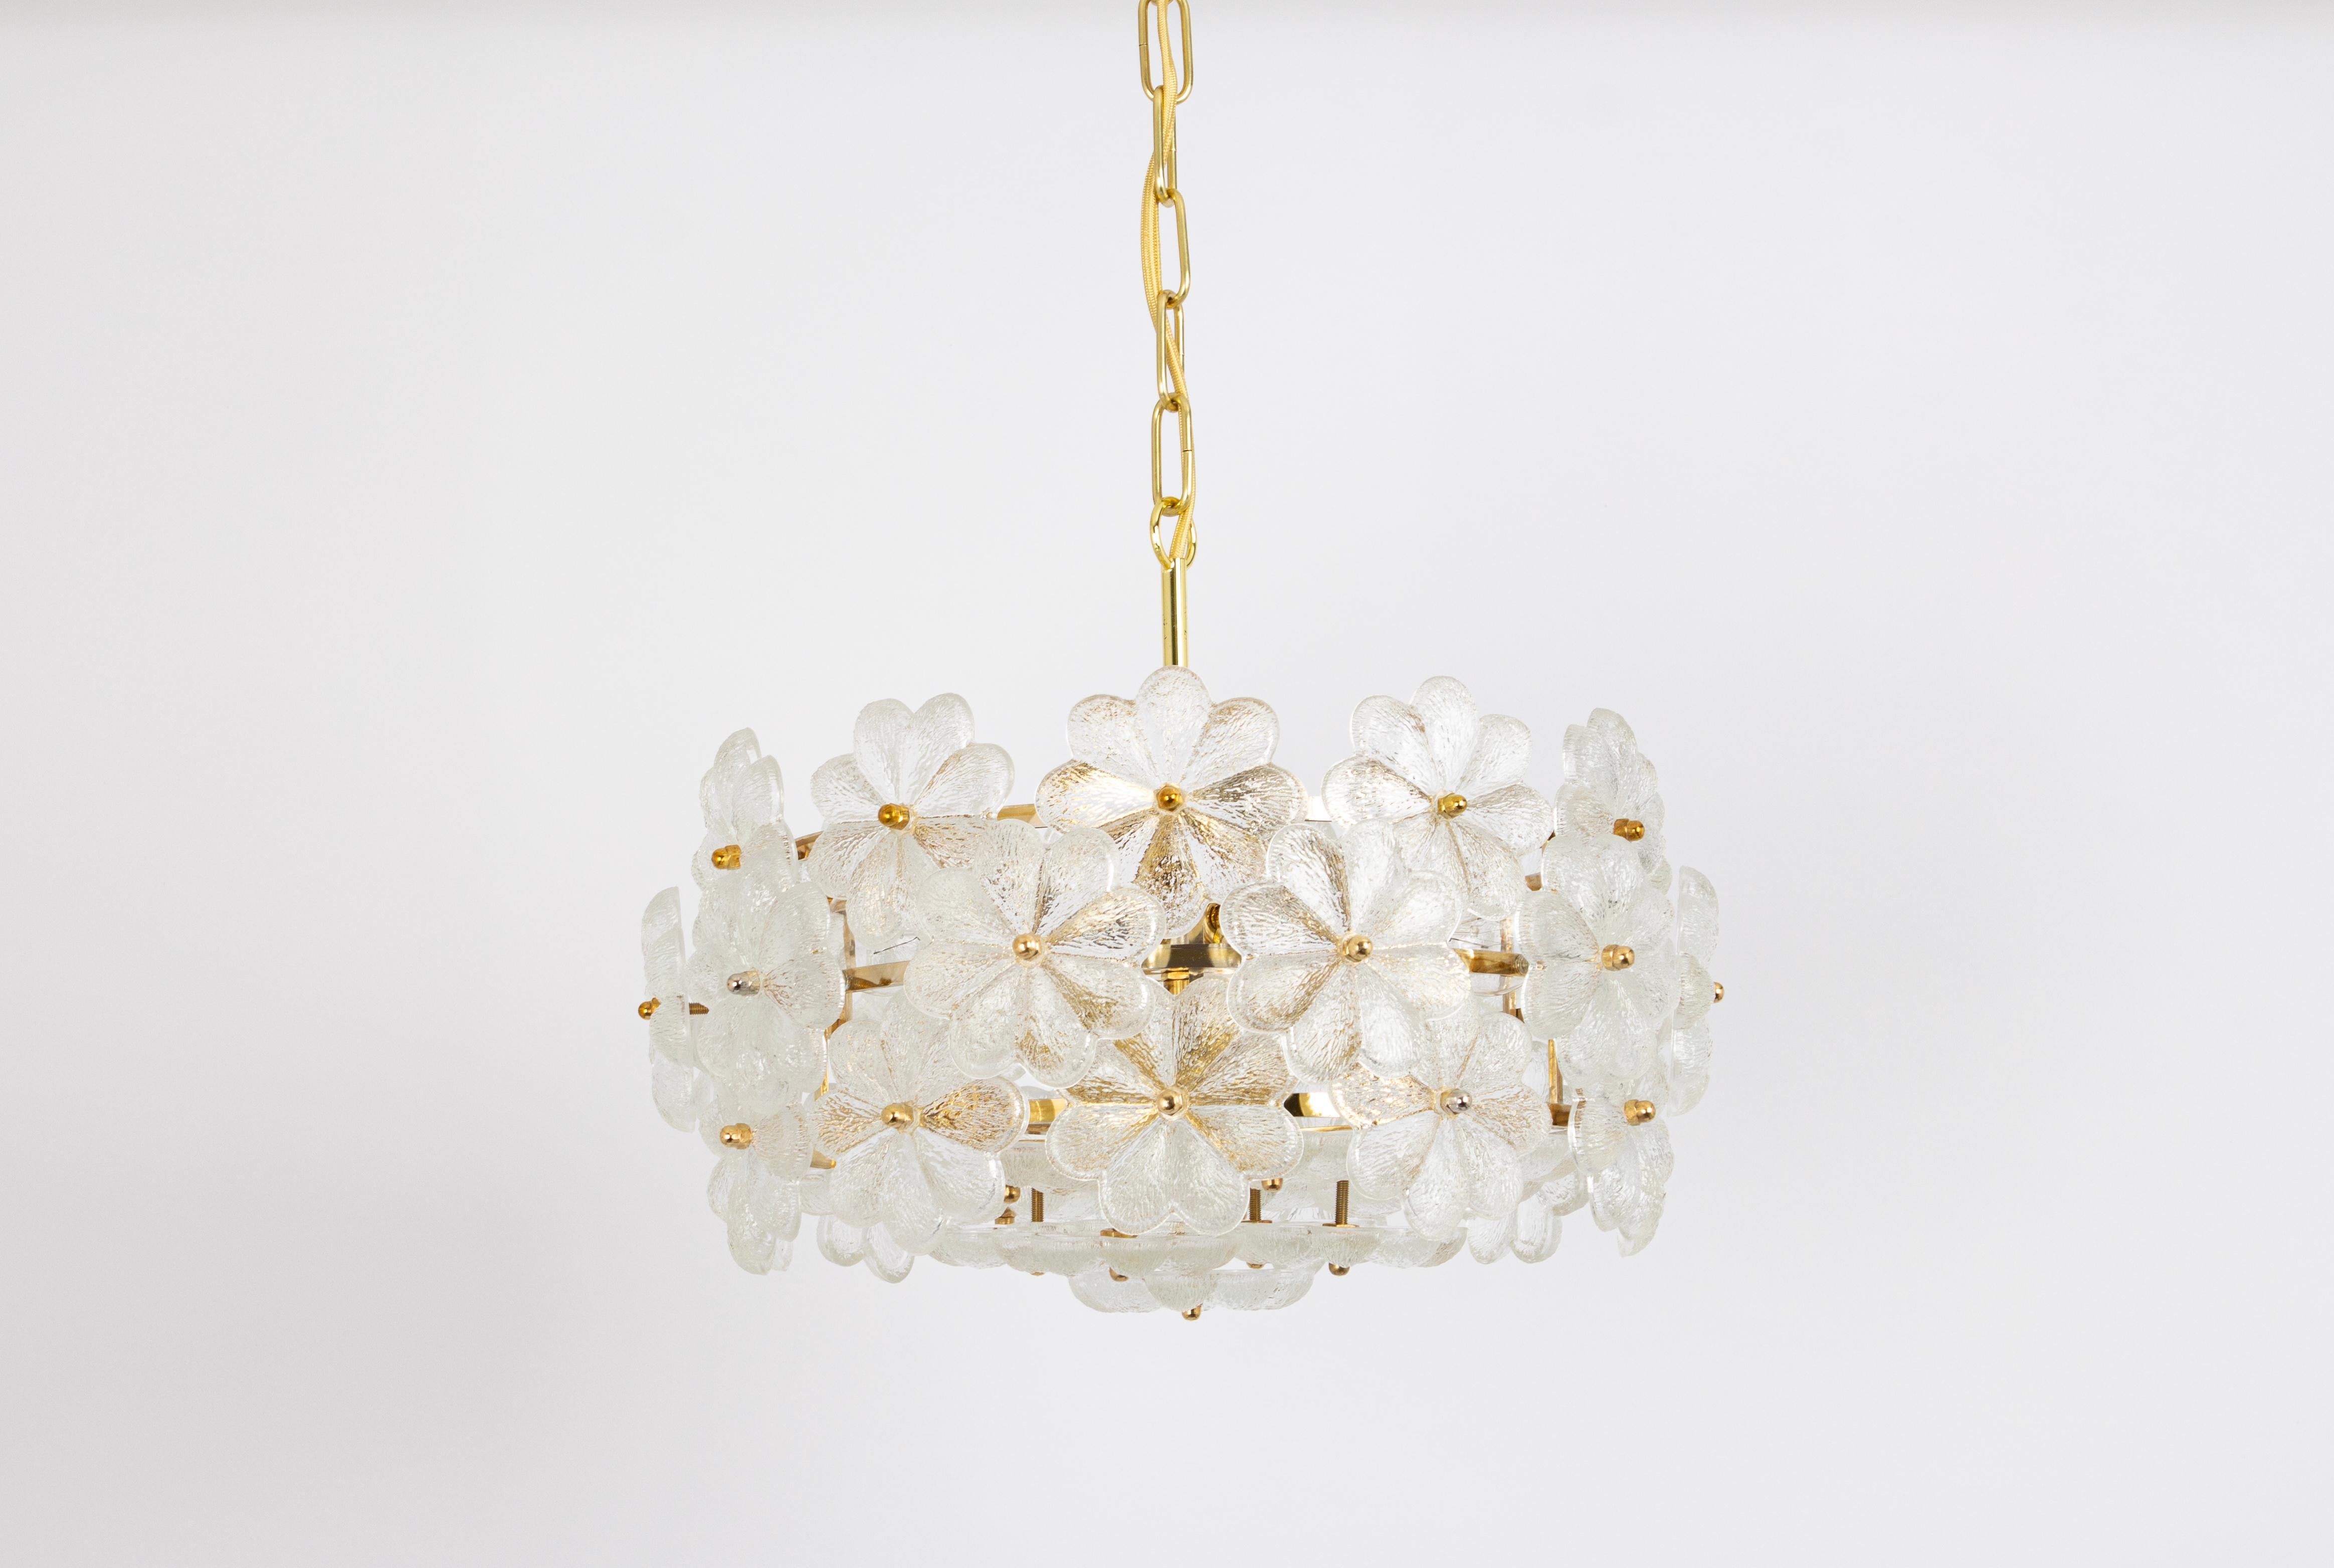 Petite stunning chandelier with many Murano flower crystal glass over a brass frame, made by Ernst Palme in Germany, 1970s.
High quality and in very good condition. Cleaned, well-wired and ready to use. 

The chandelier requires 6 x E14 small bulbs